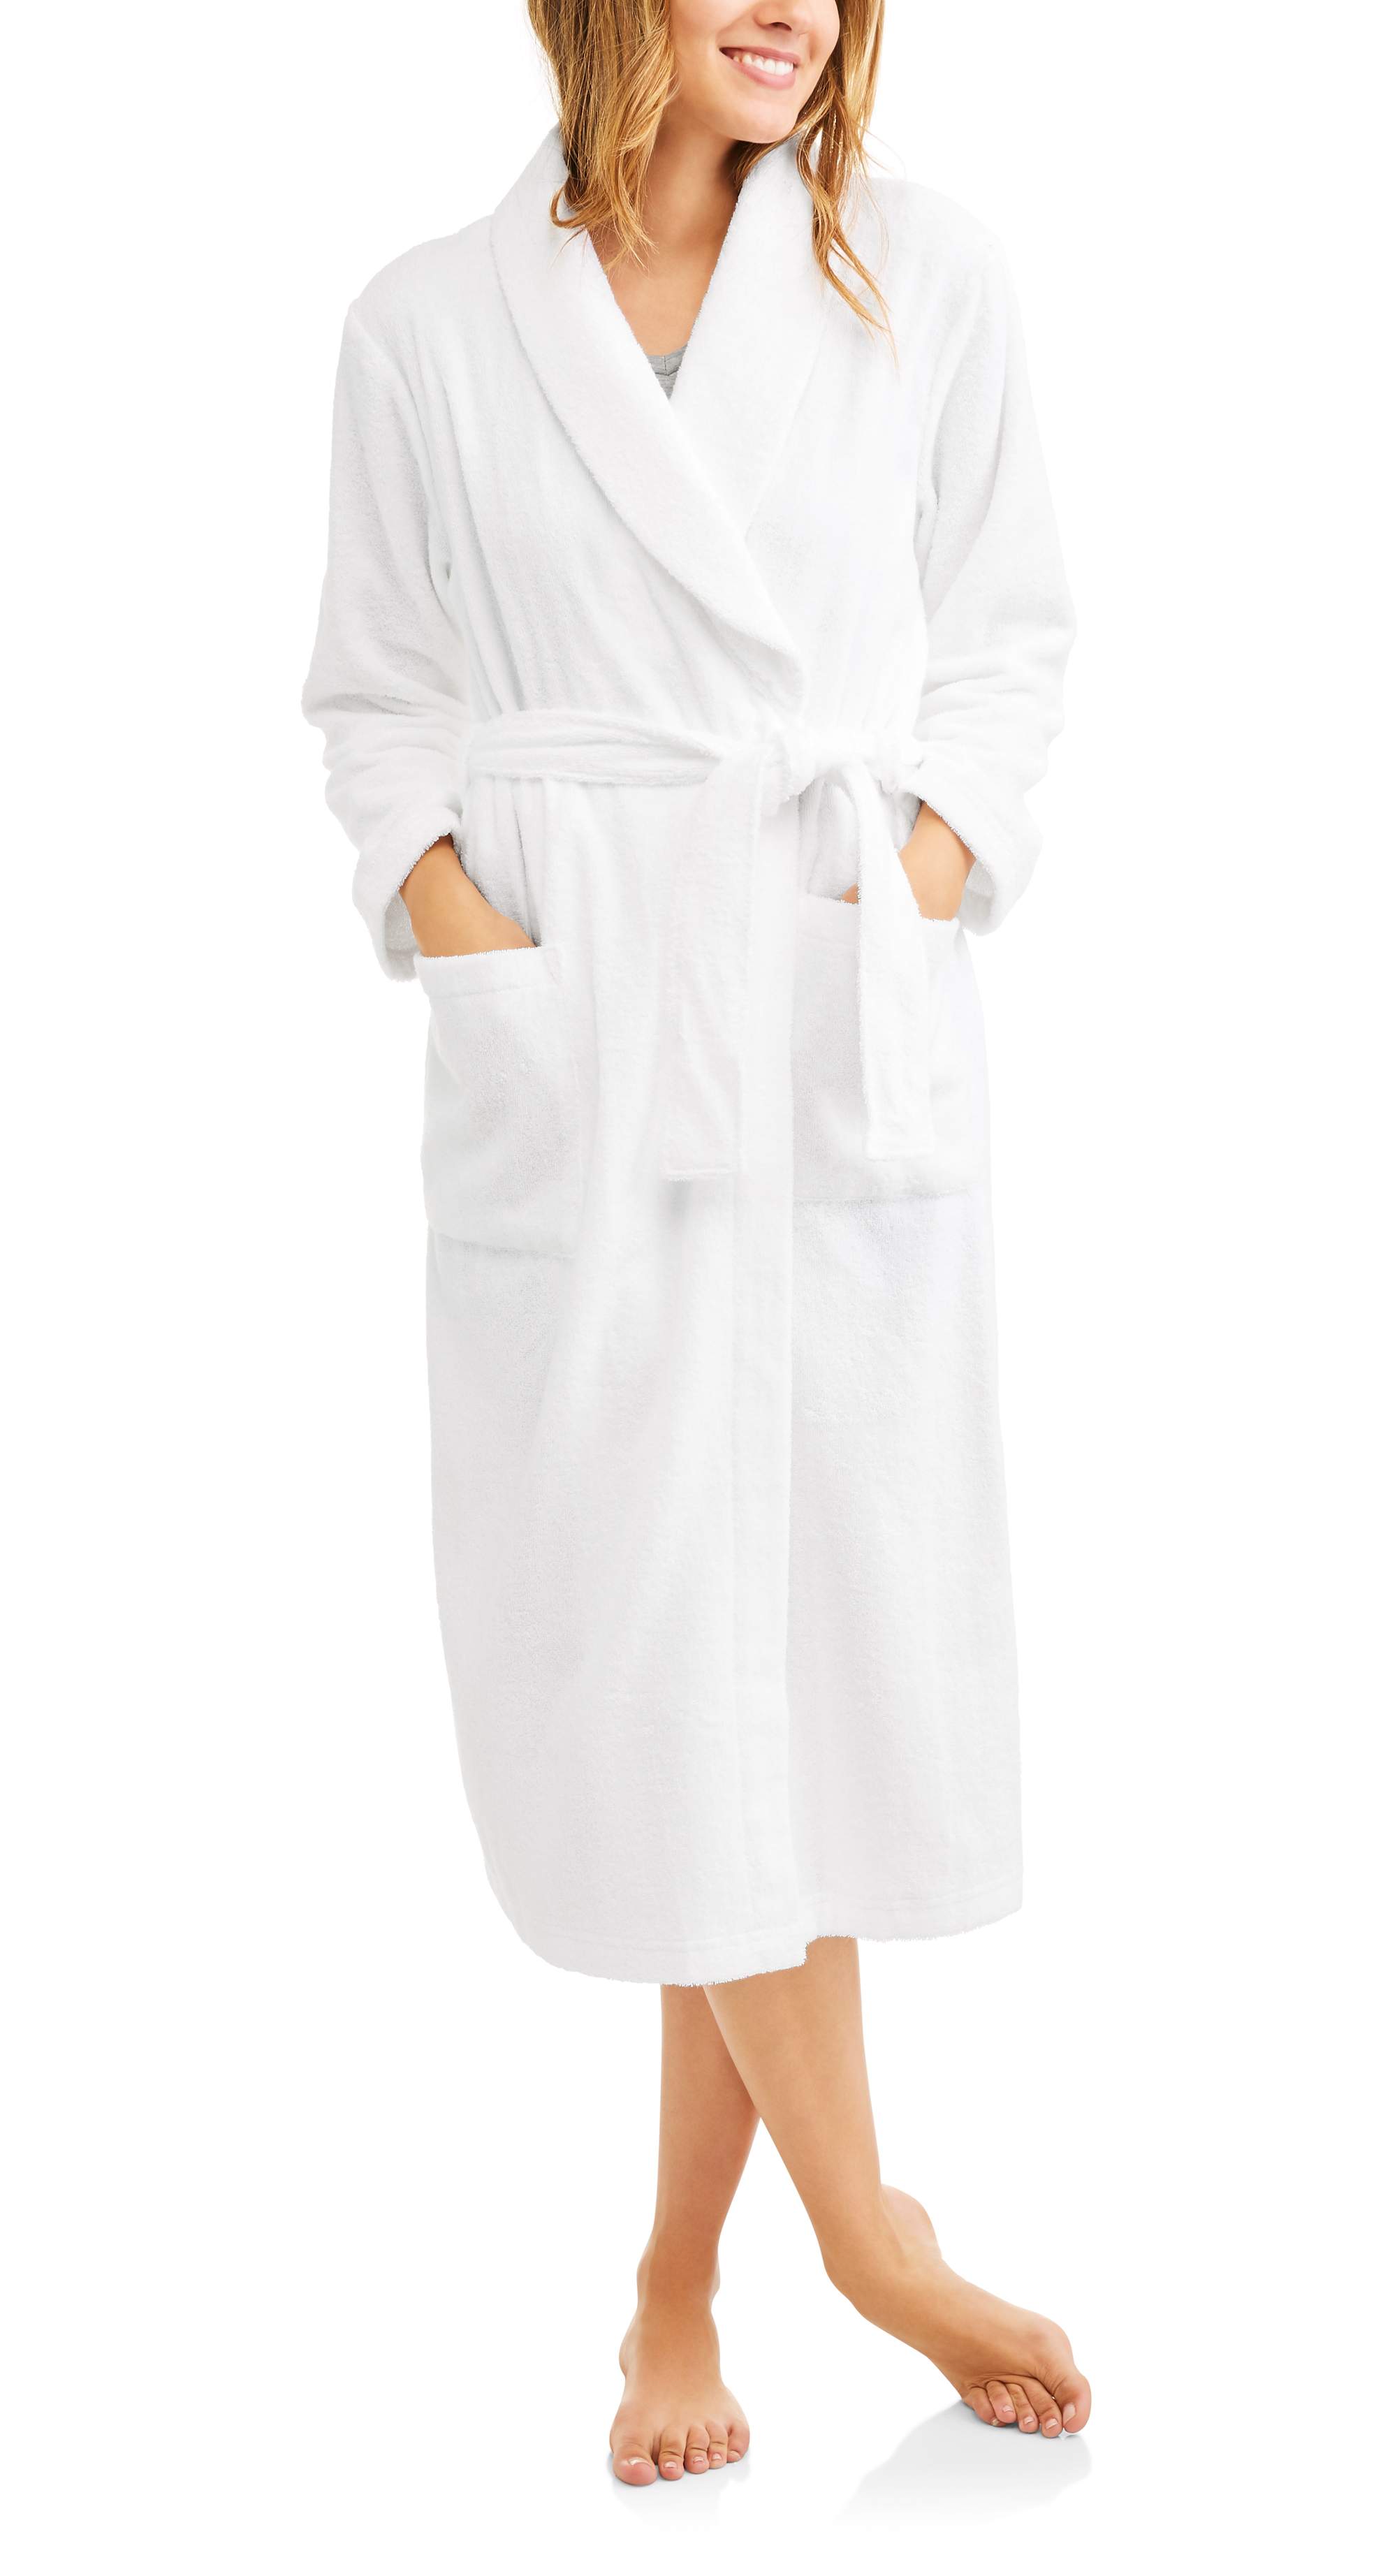 Women’s 48″ spa robe with shawl collar for $15